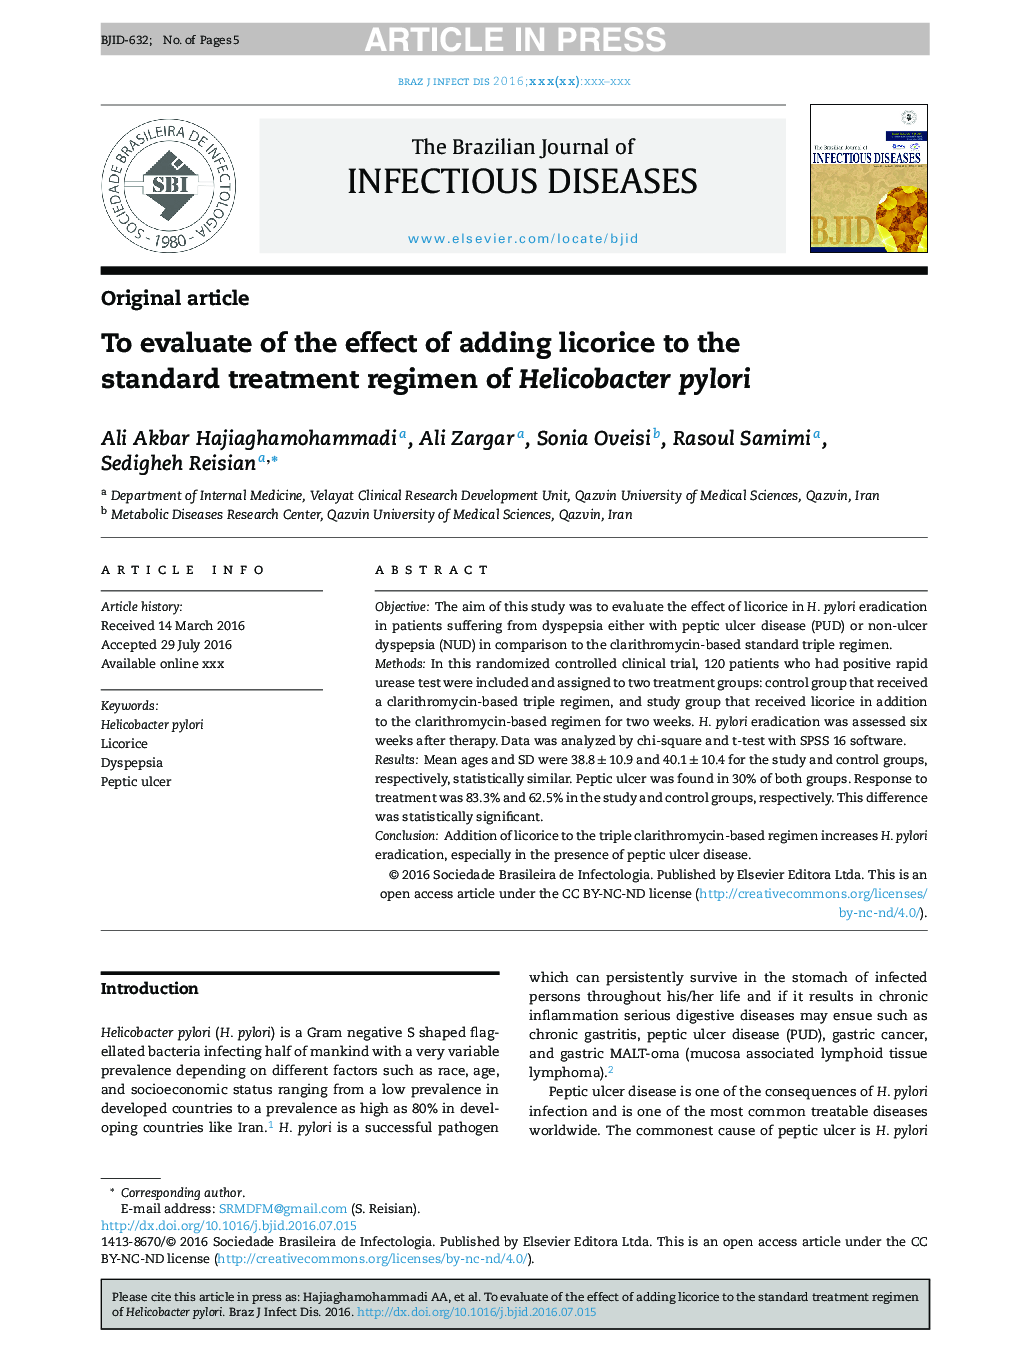 To evaluate of the effect of adding licorice to the standard treatment regimen of Helicobacter pylori